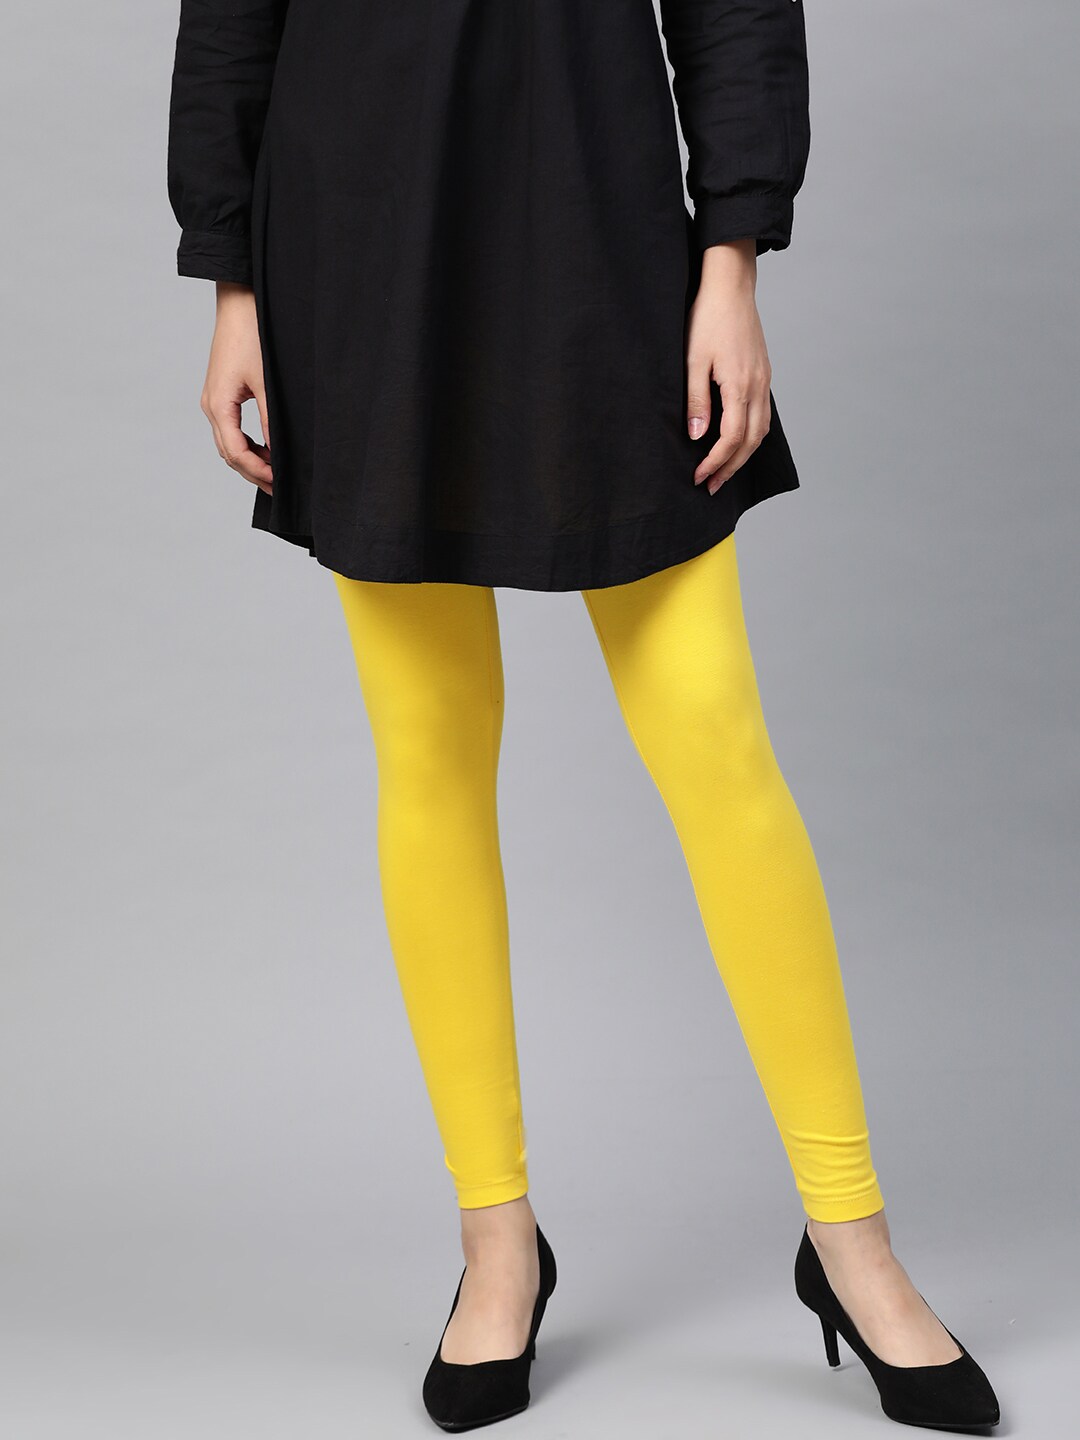 W Women Yellow Solid Ankle Length Leggings Price in India